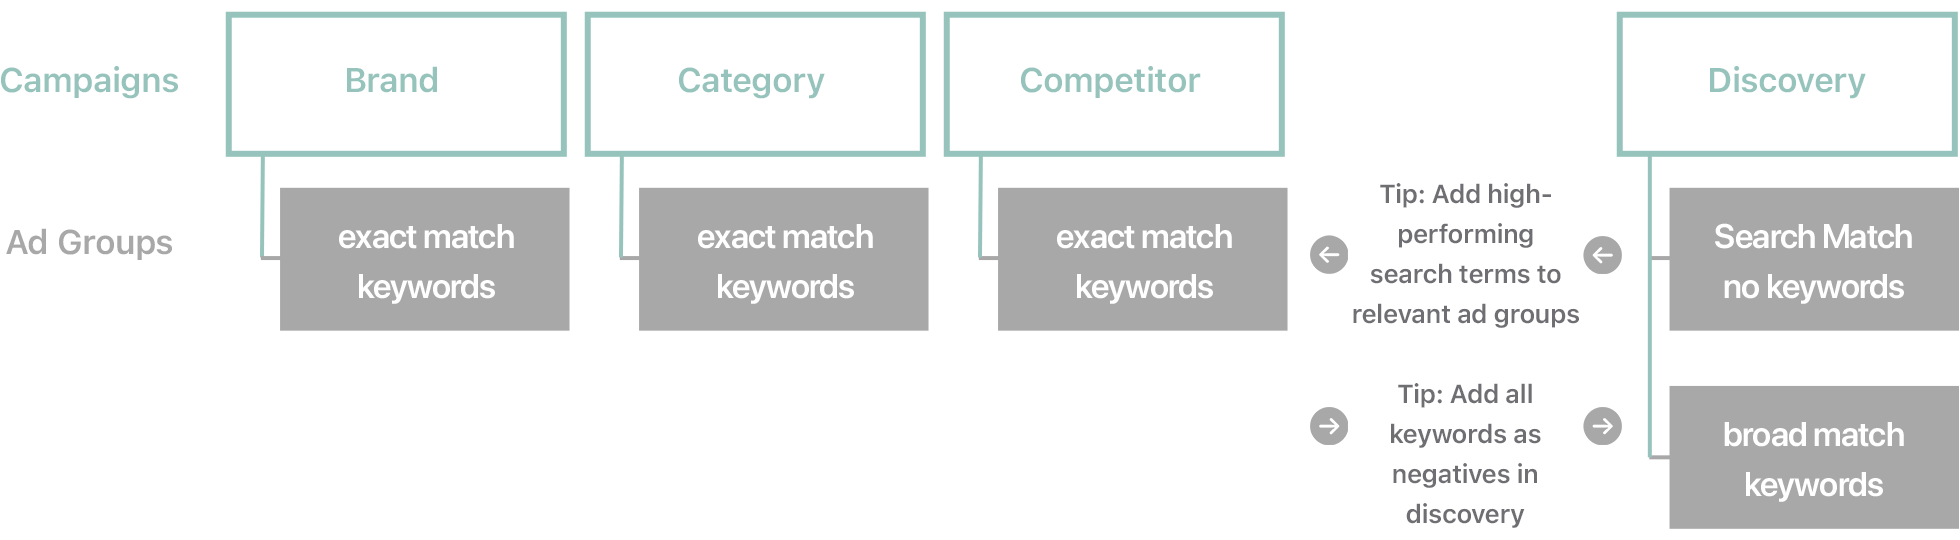 Diagram of campaign types and associated ad groups, and keyword tips. 